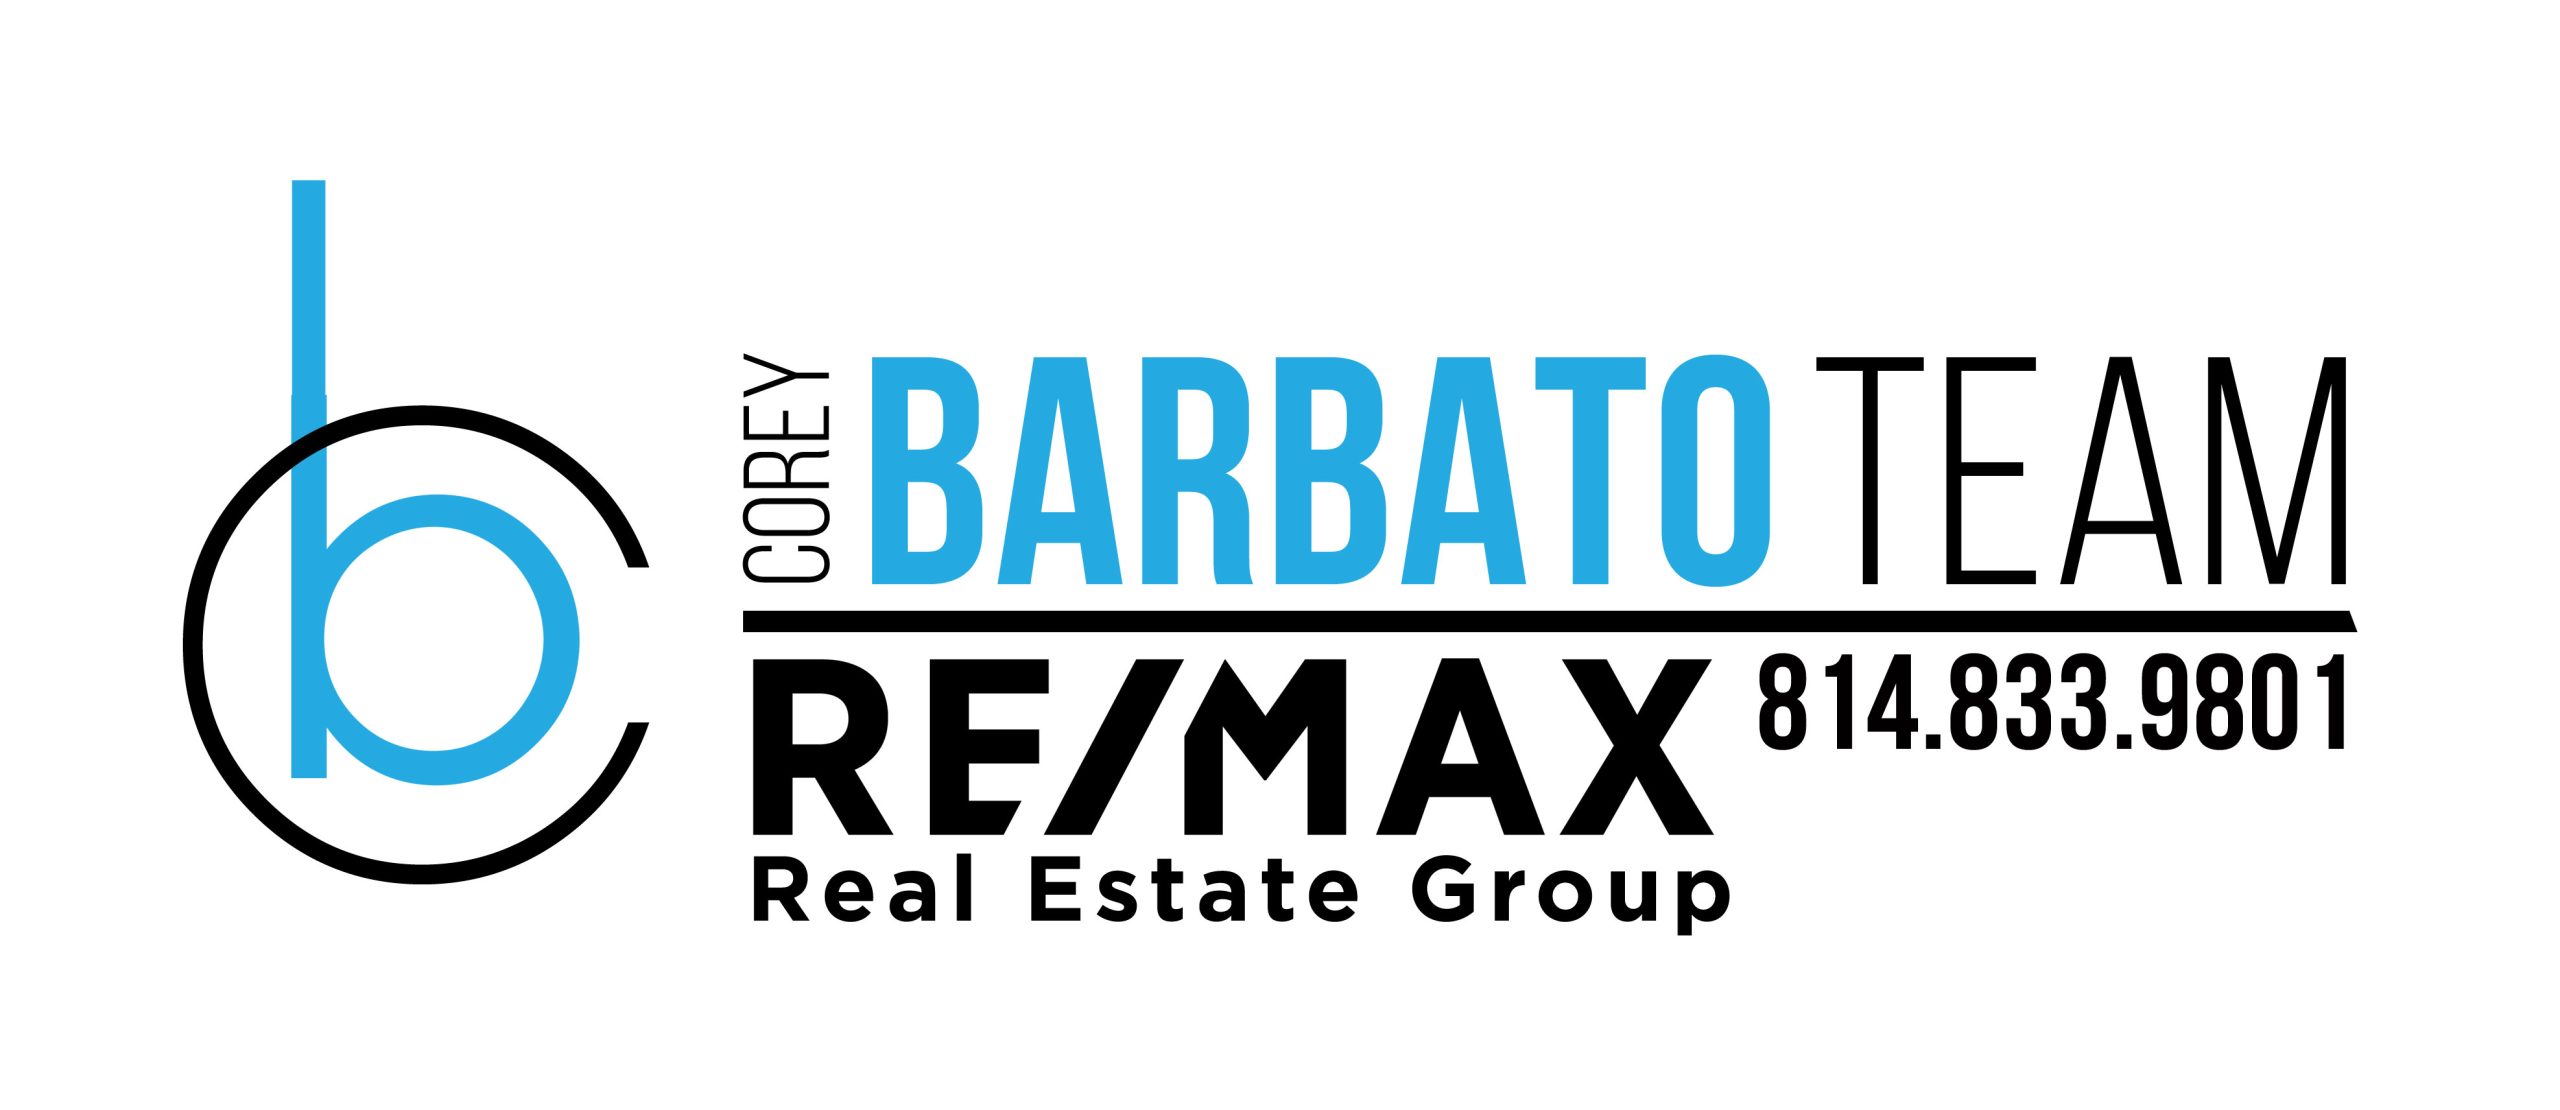 Featured Contact Corey Barbato at RE/MAX Real Estate Group